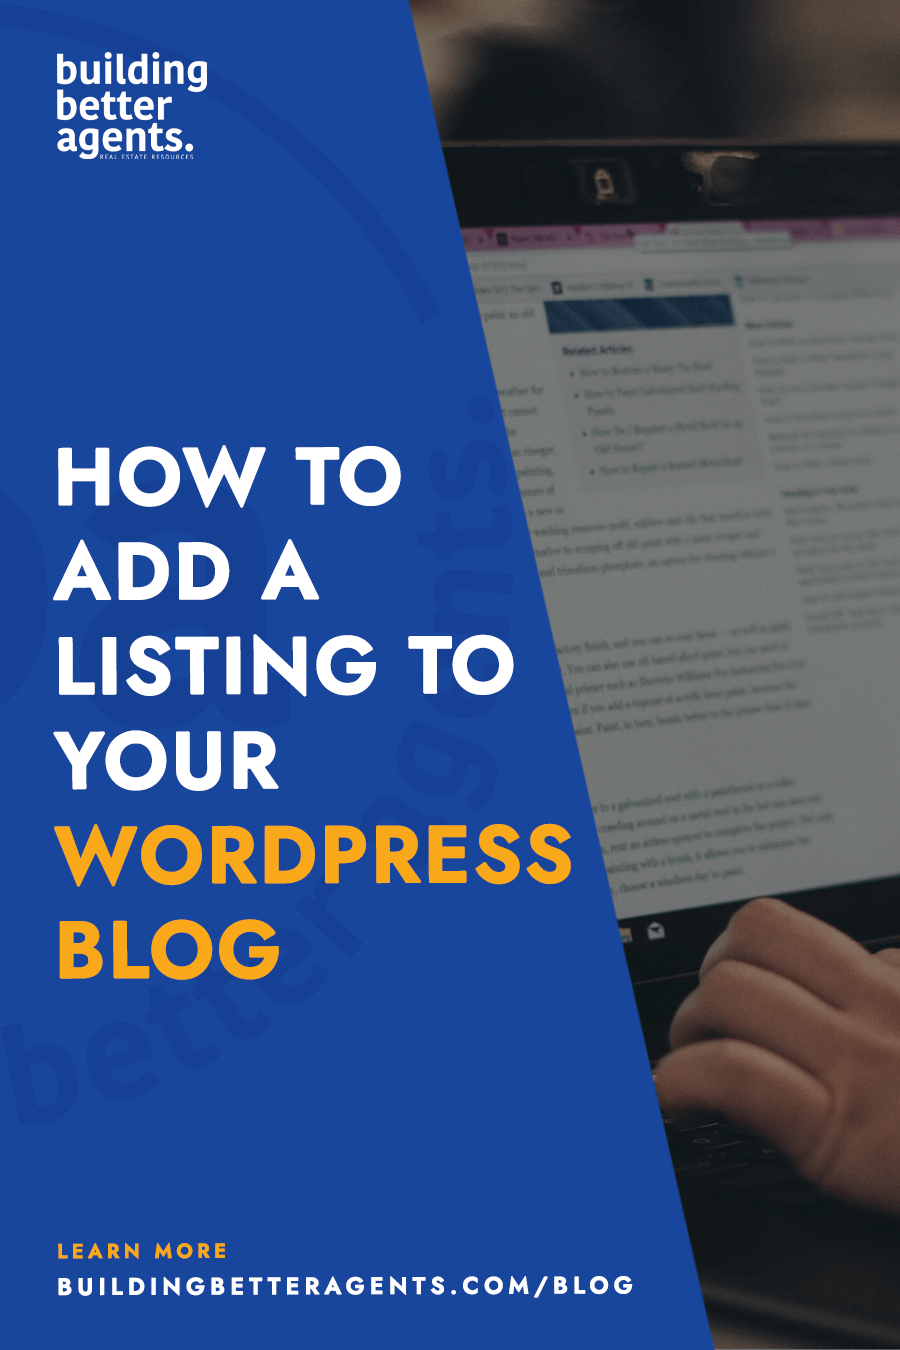 How To Add A Listing To Your WordPress Blog